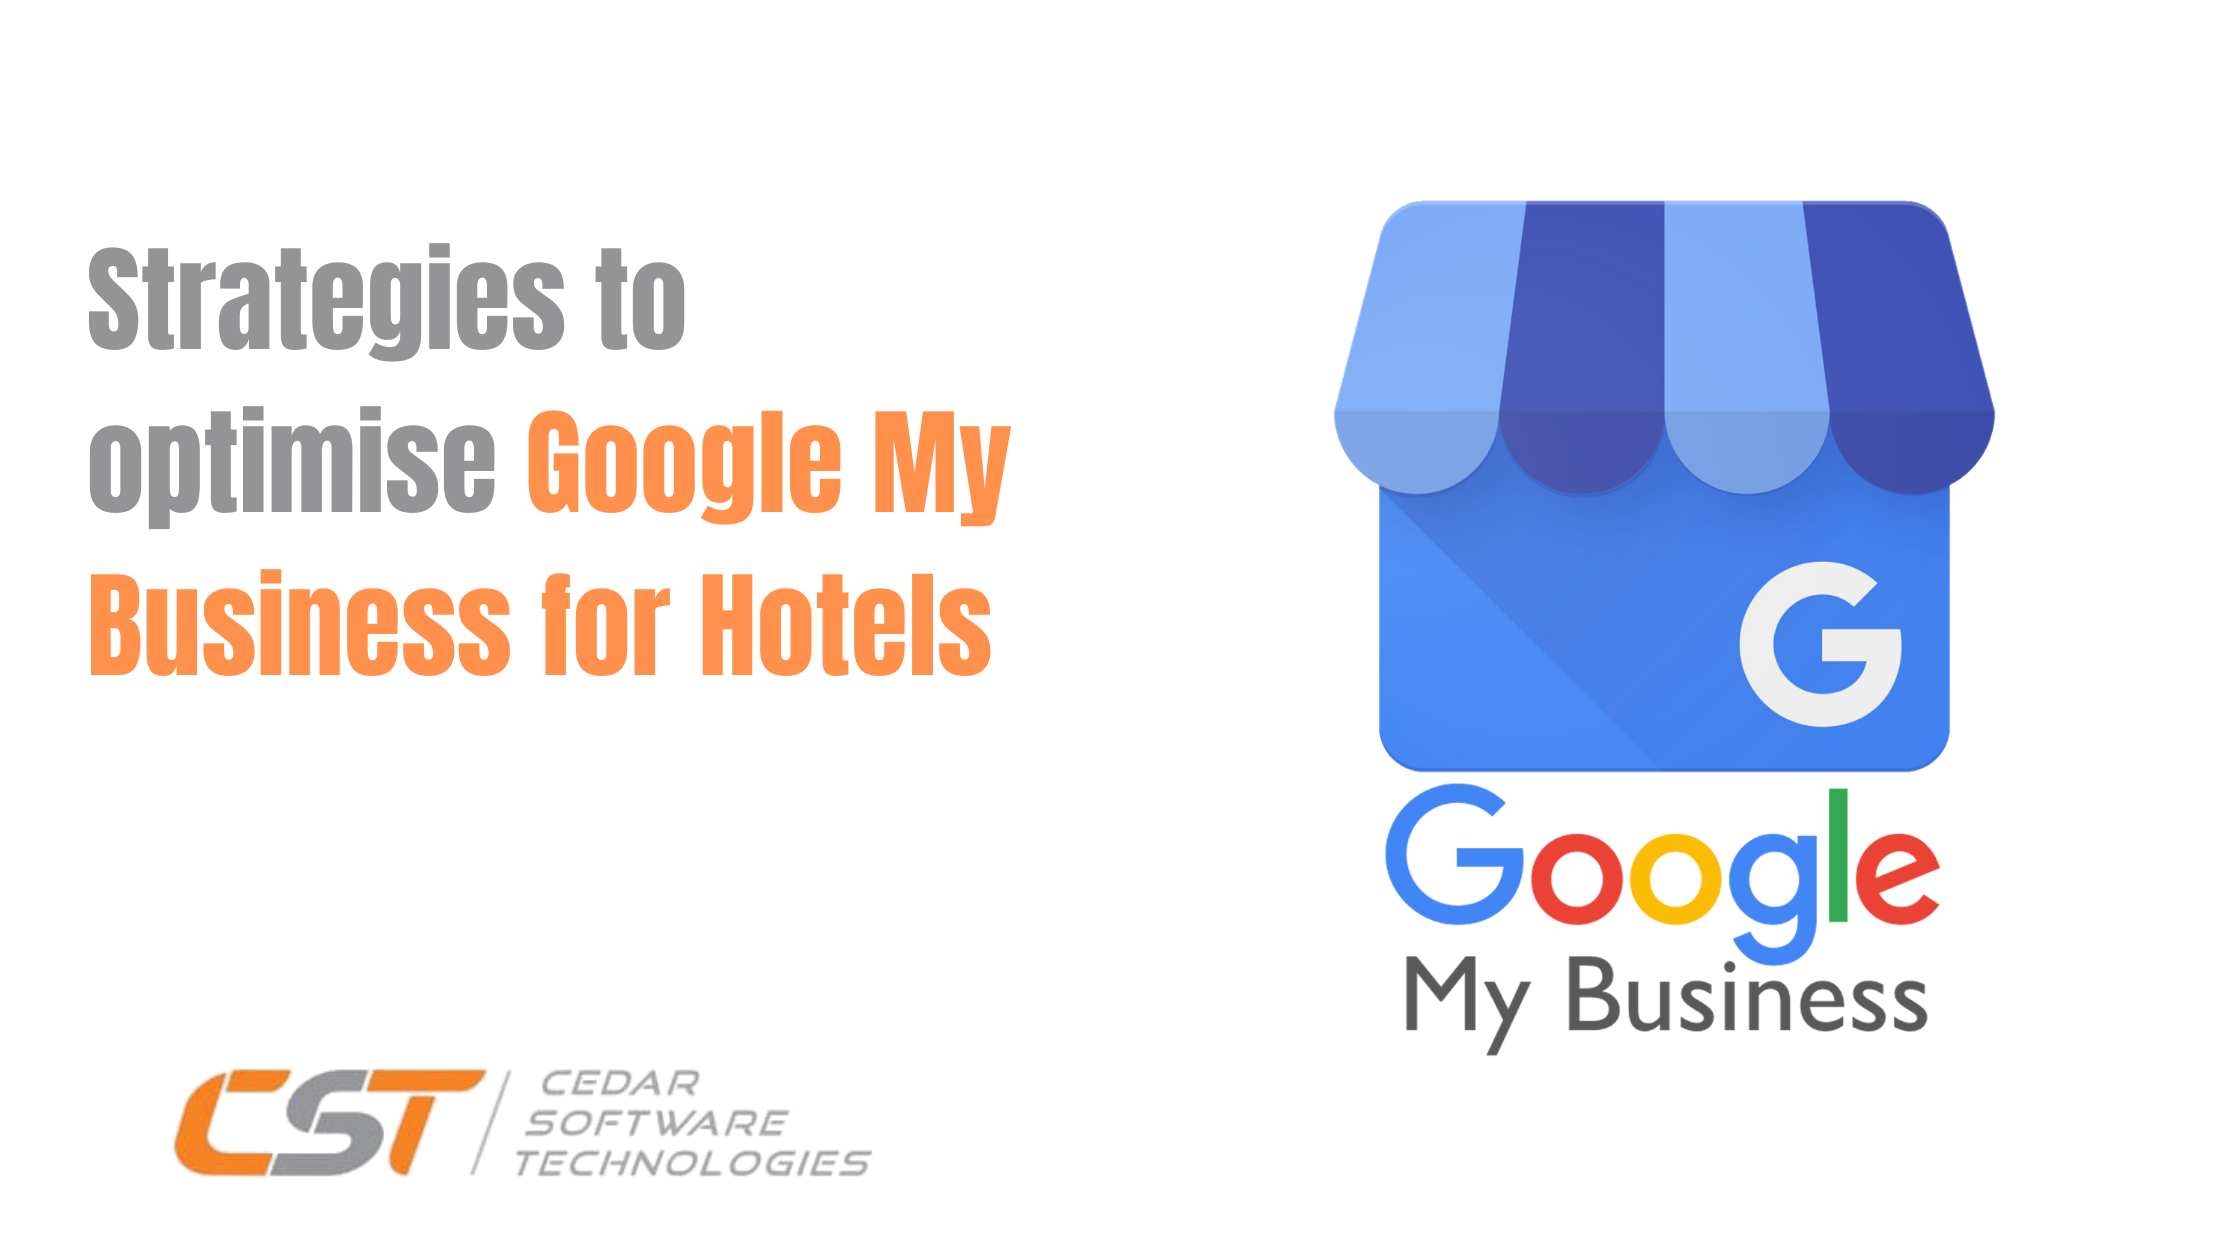 Strategies to optimise Google My Business for Hotels